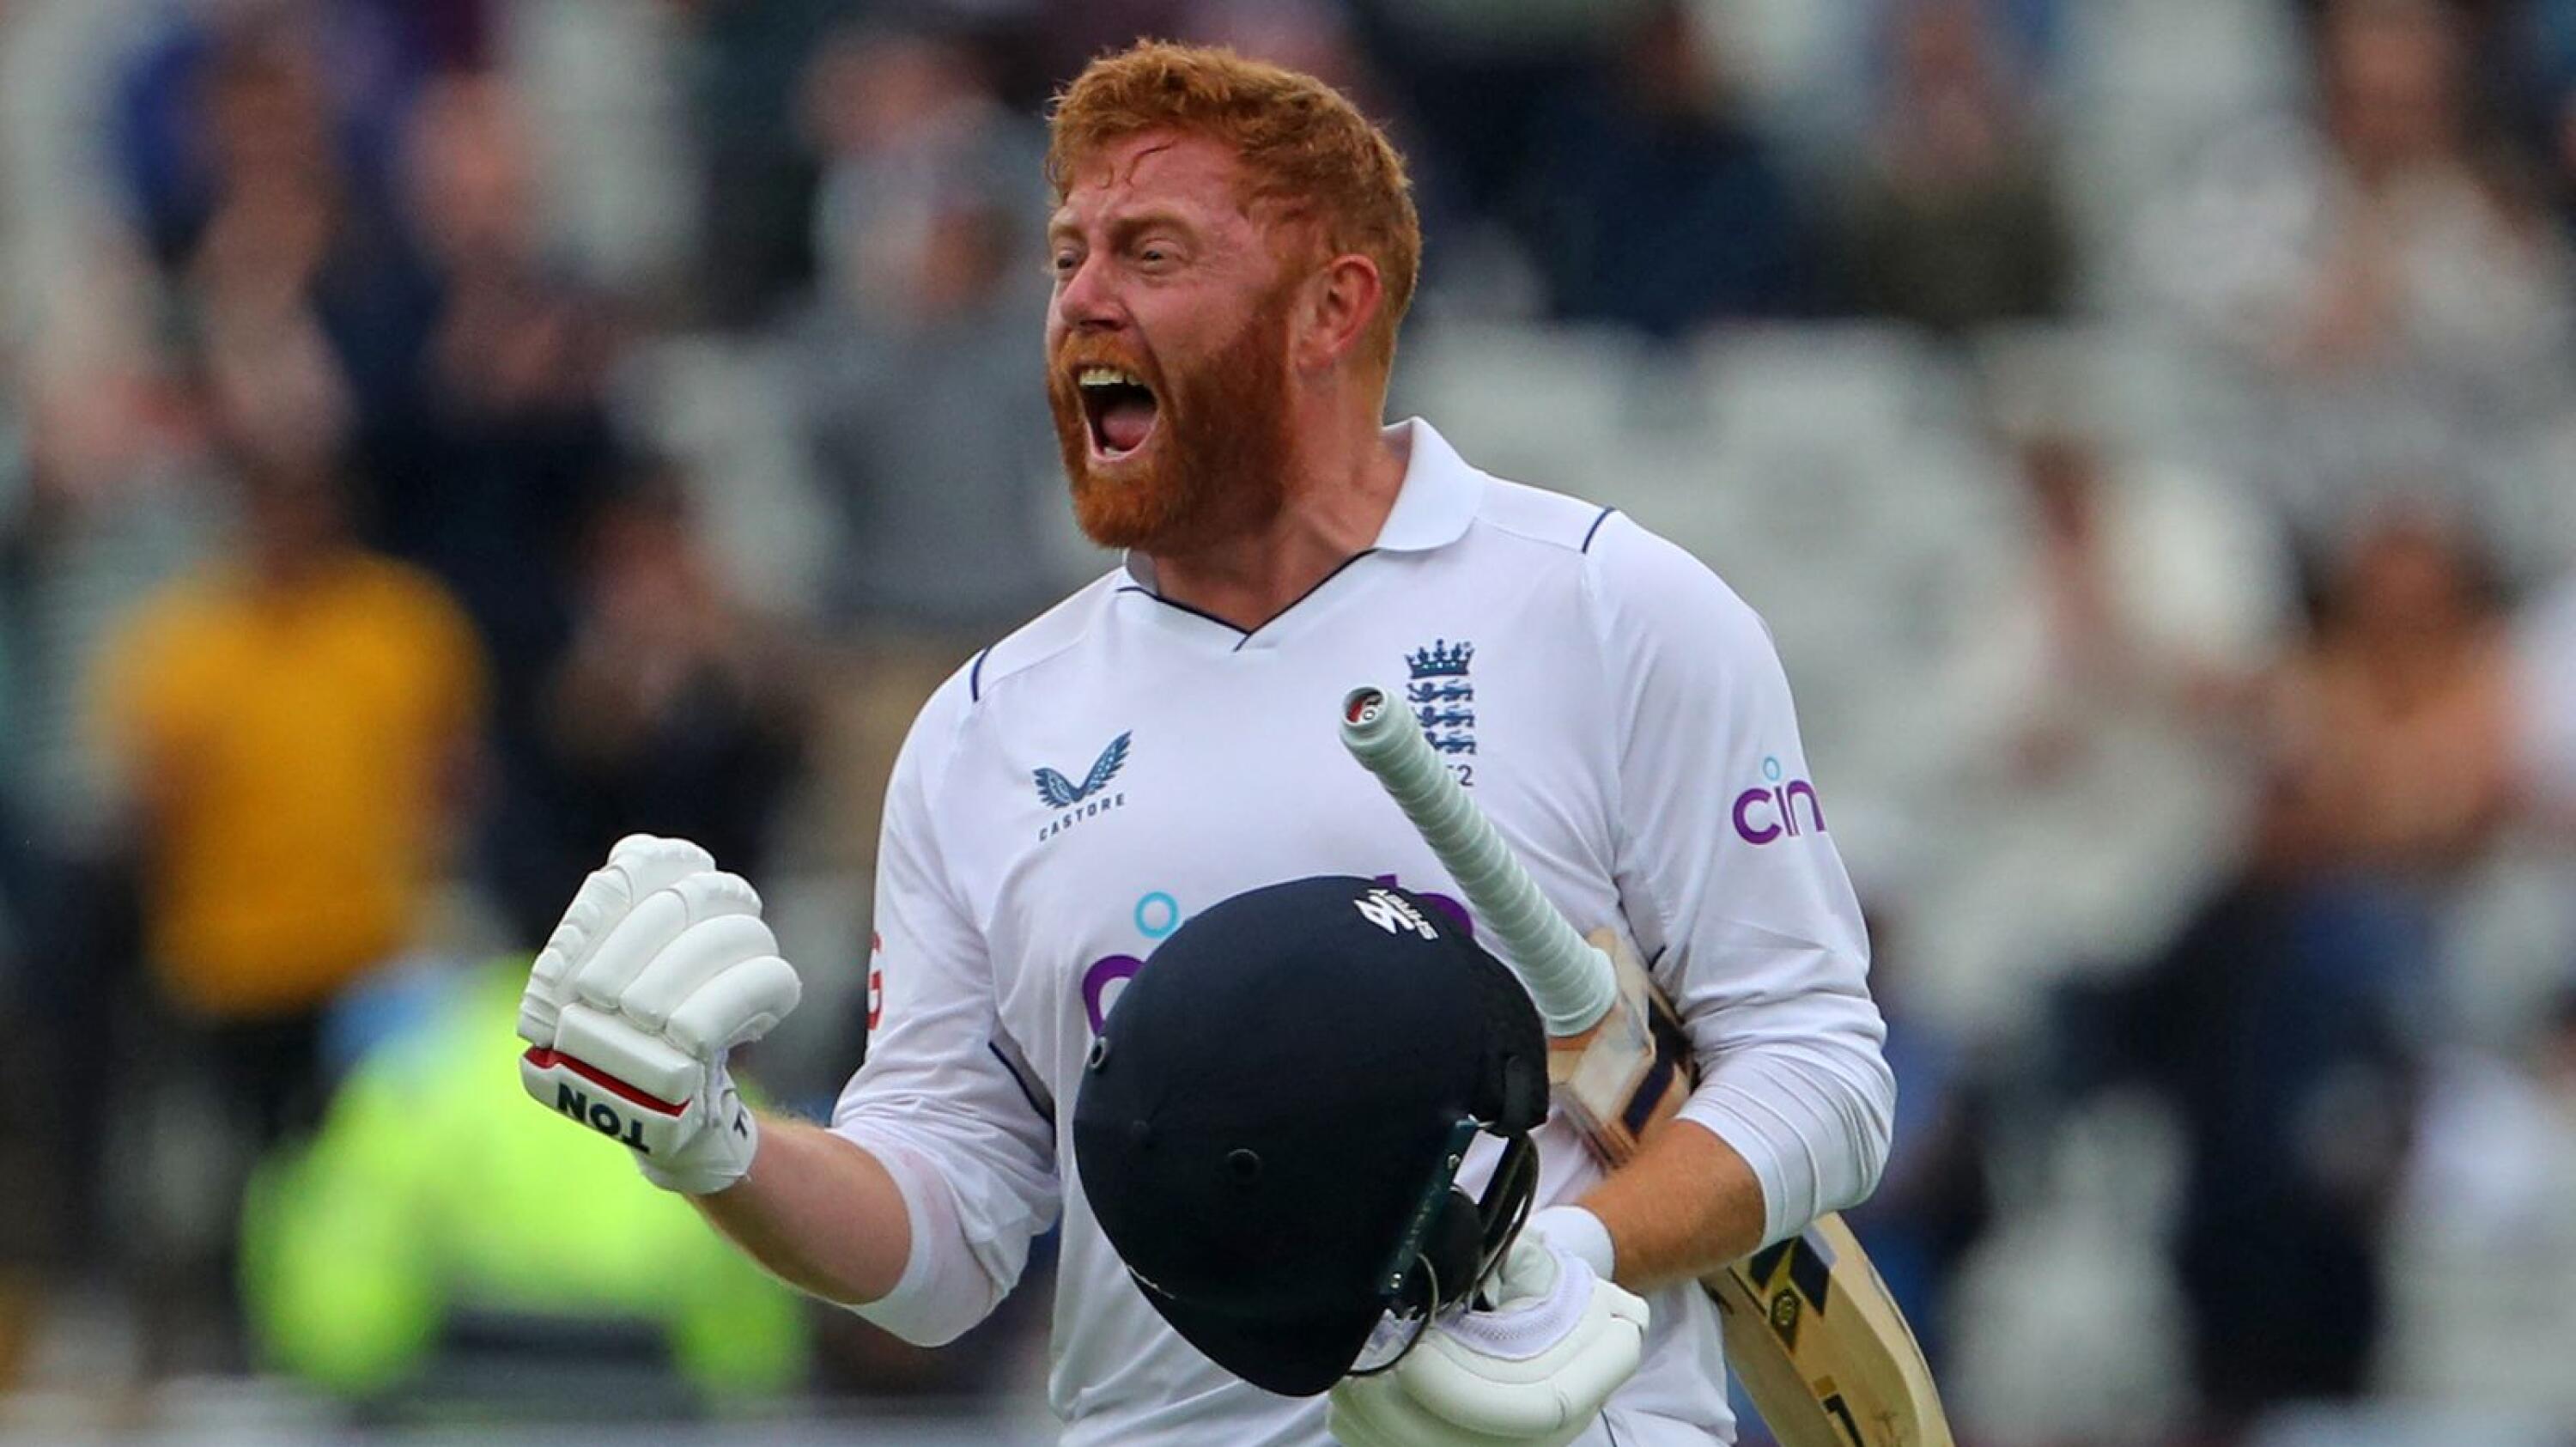 England's Jonny Bairstow celebrates on Day 5 of the fifth cricket Test match against India at Edgbaston, Birmingham in central England on Tuesday